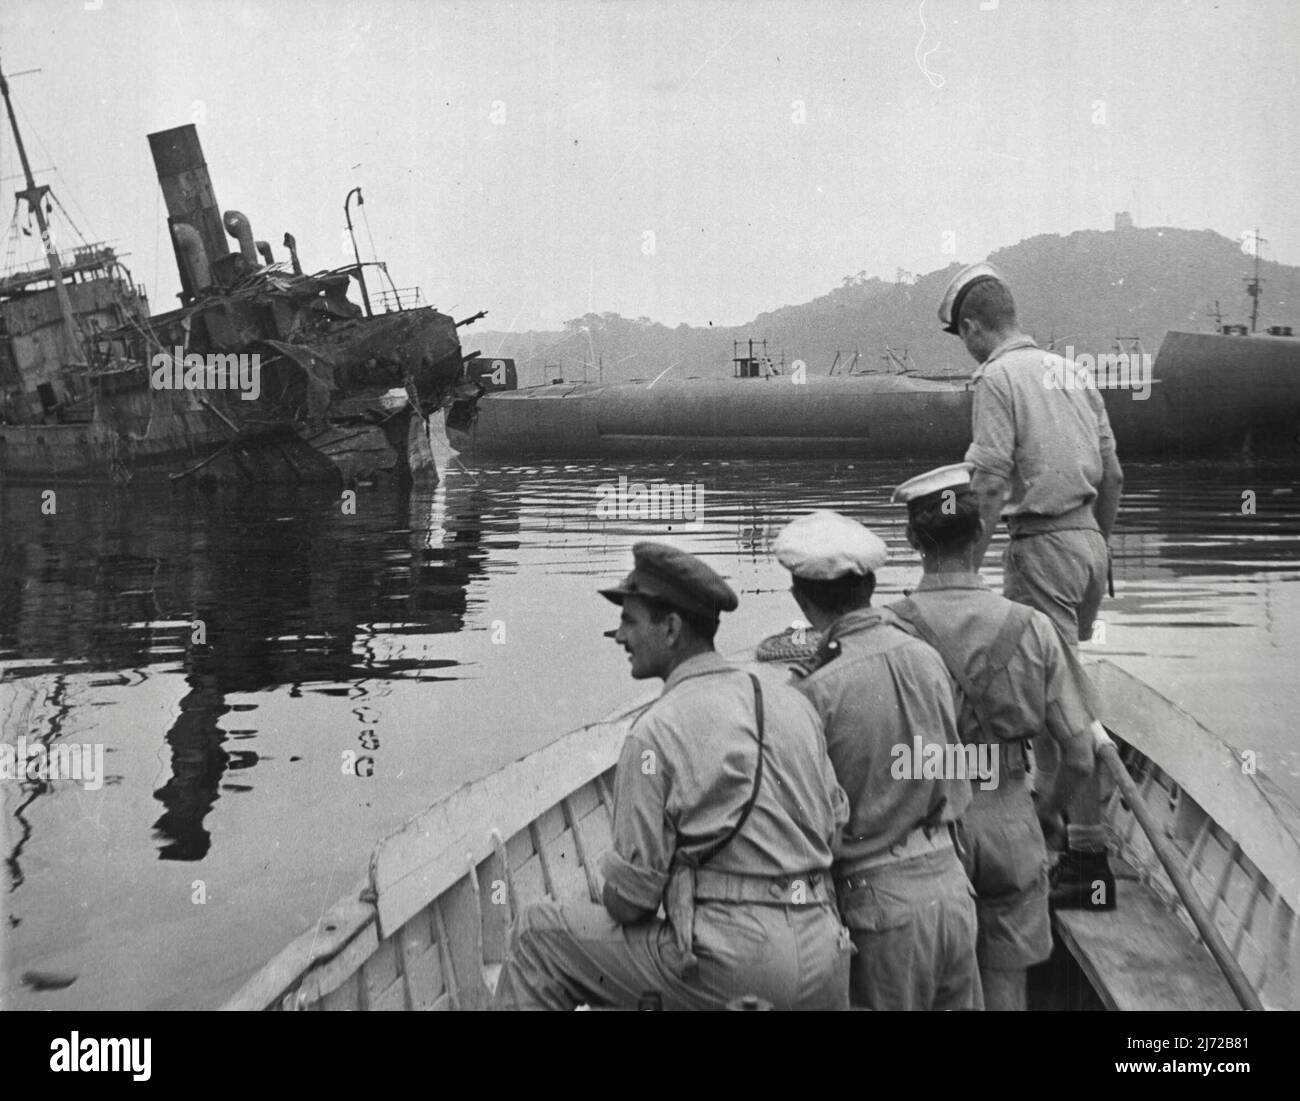 A huge Japanese cargo carrying submarine being of observed by Australian Naval personnel. This submarine was found in the Yokosuka Naval Base when it was occupied by the British Landing Force. Badly damaged ship in background. September 24, 1945. (Photo by Australian Official Photo). Stock Photo